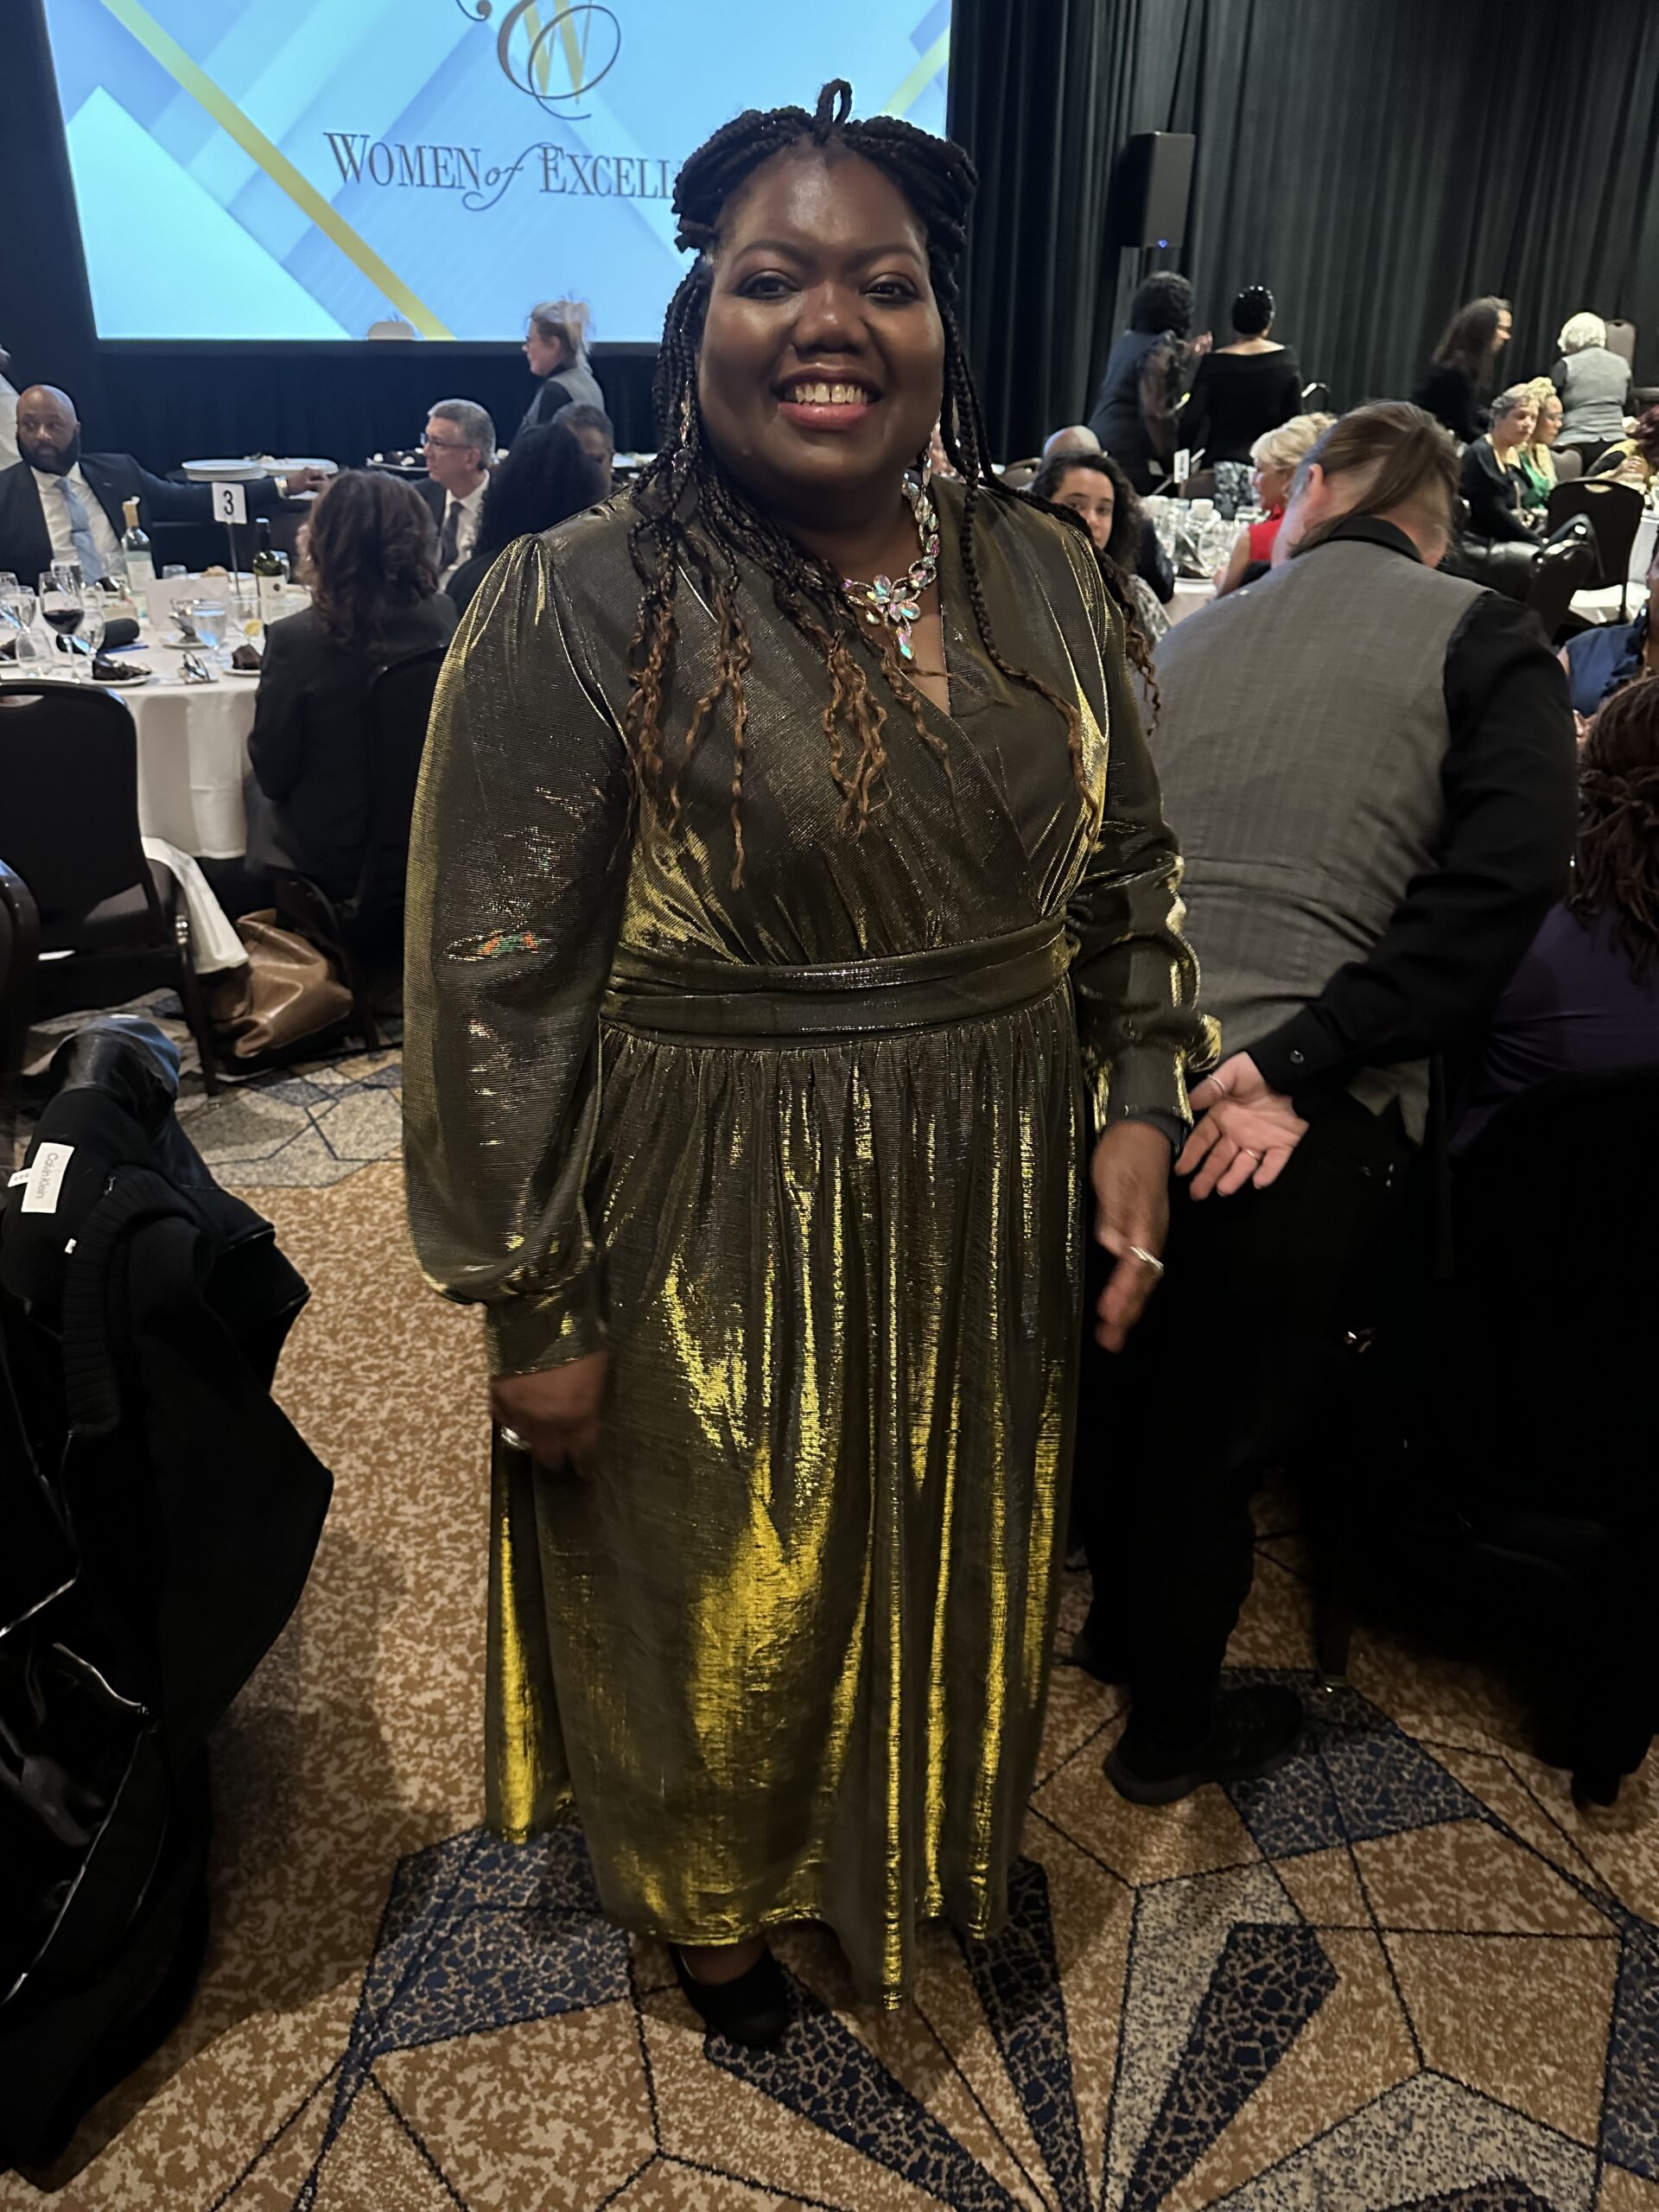 CAYUGA CENTERS MANAGER L’TESHA GAMBLE PETTIS NAMED 2023 WOMEN OF EXCELLENCE HONOREE